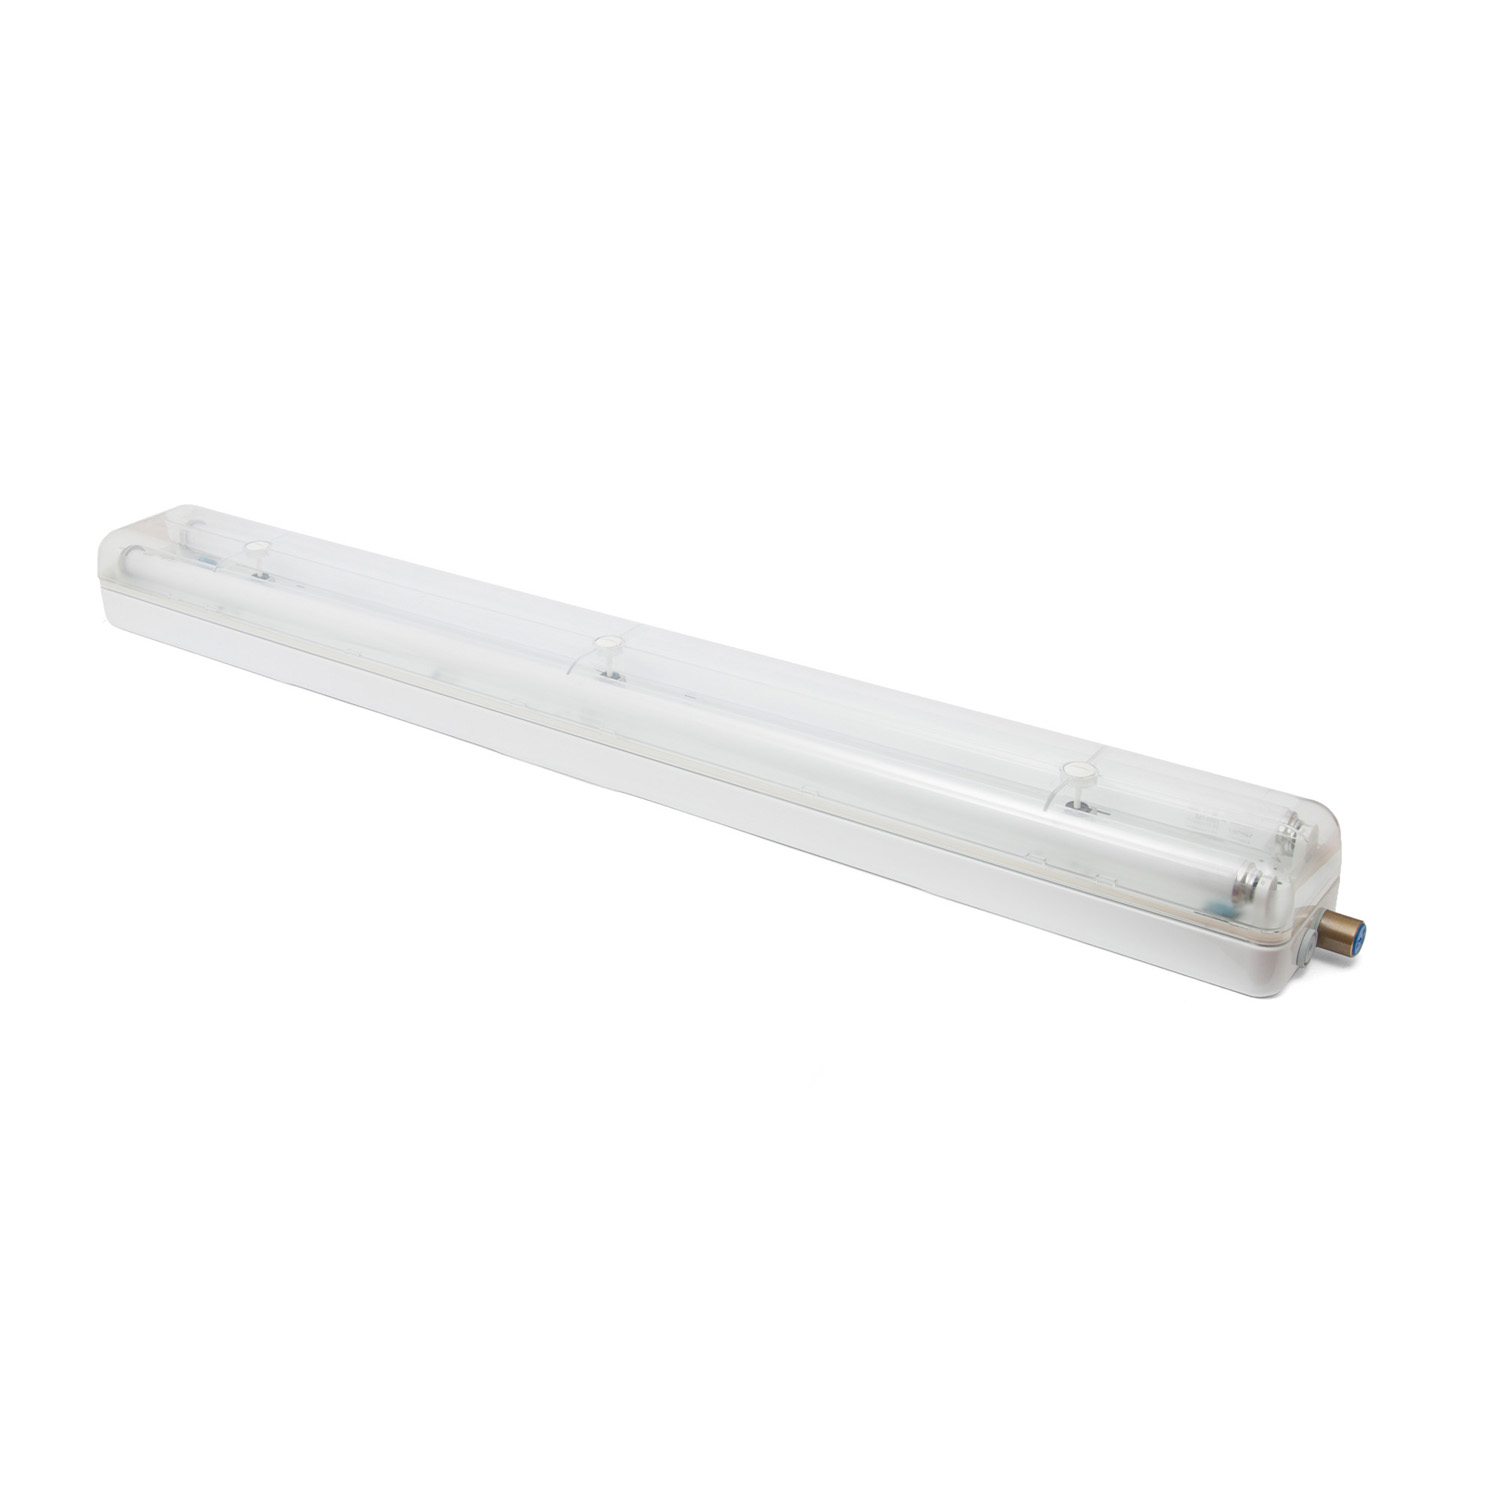 1891404201 Coldroom luminair surface, 2x36W, 230V 60Hz, IP55, incl. thermo tubes T38